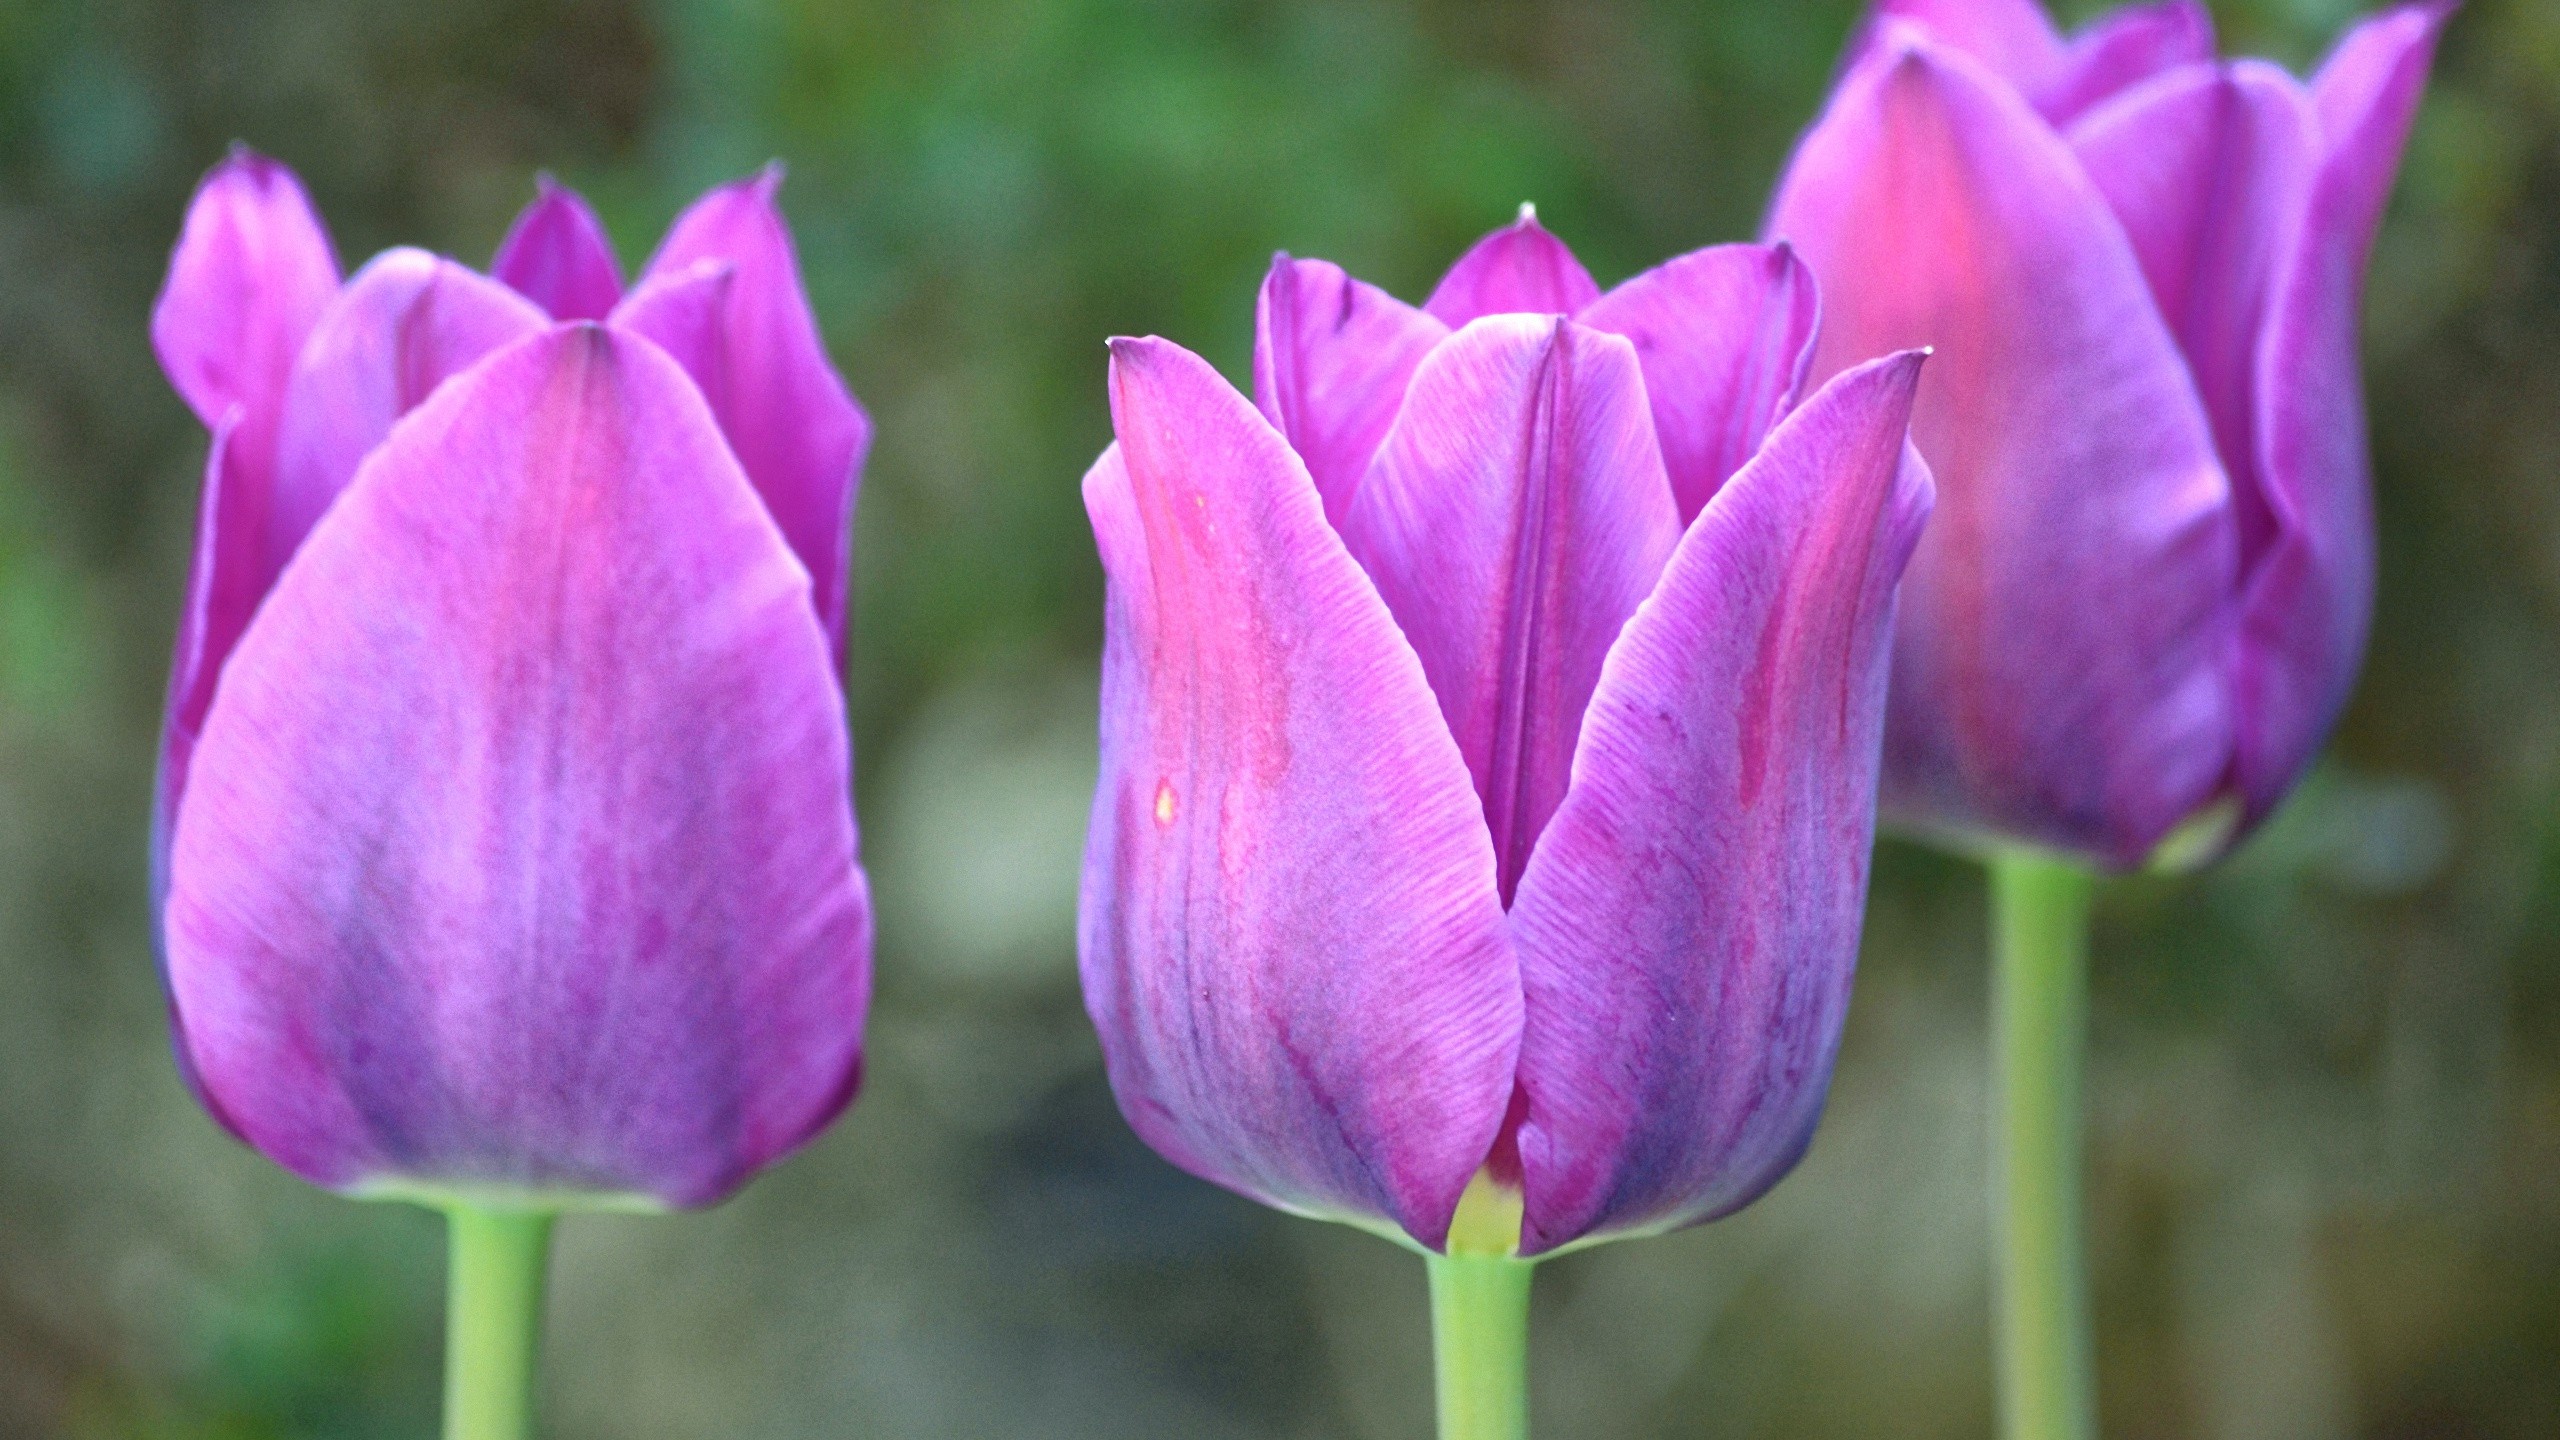 General 2560x1440 flowers photography tulips